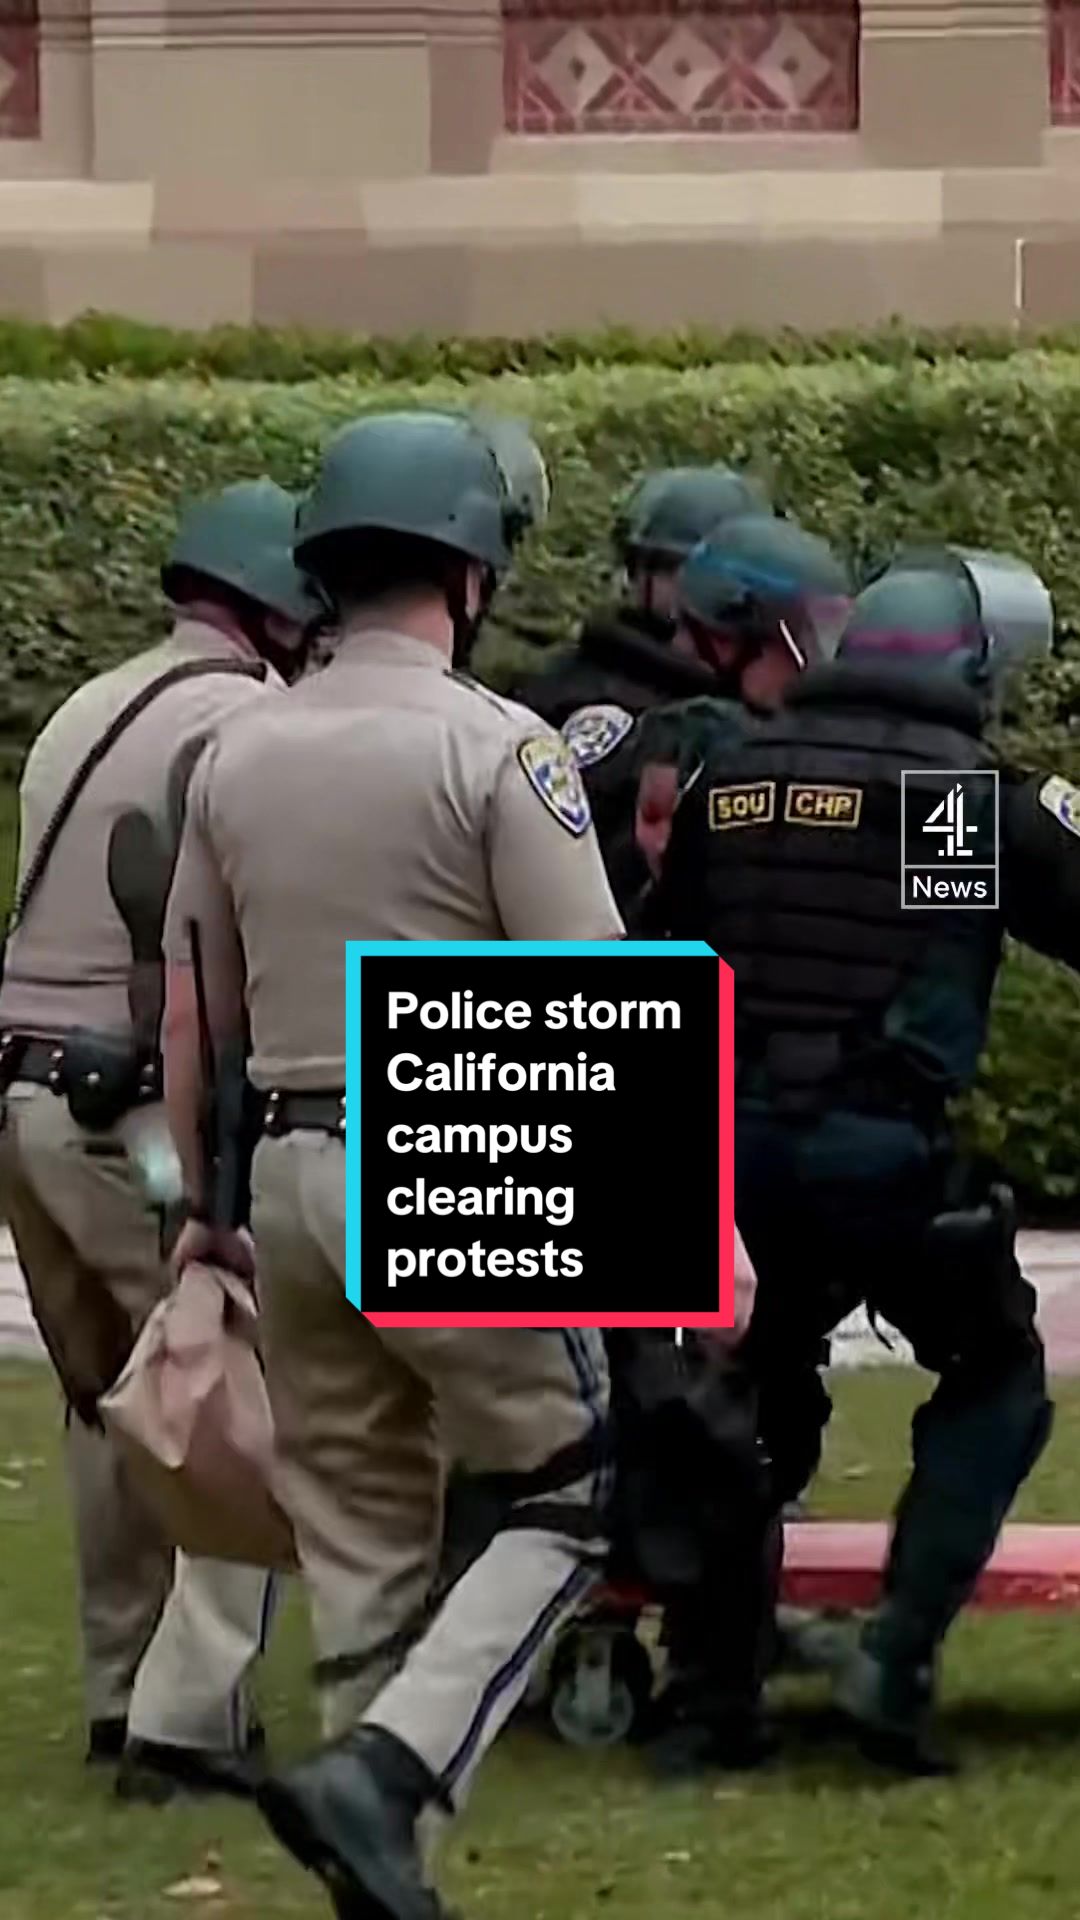 Police clear UCLA encampment and arrest over 130 Gaza demonstrators President Joe Biden has condemned protests that had turned violent on college campuses across the country. #UCLA #UCLAprotests #USNews #channel4news